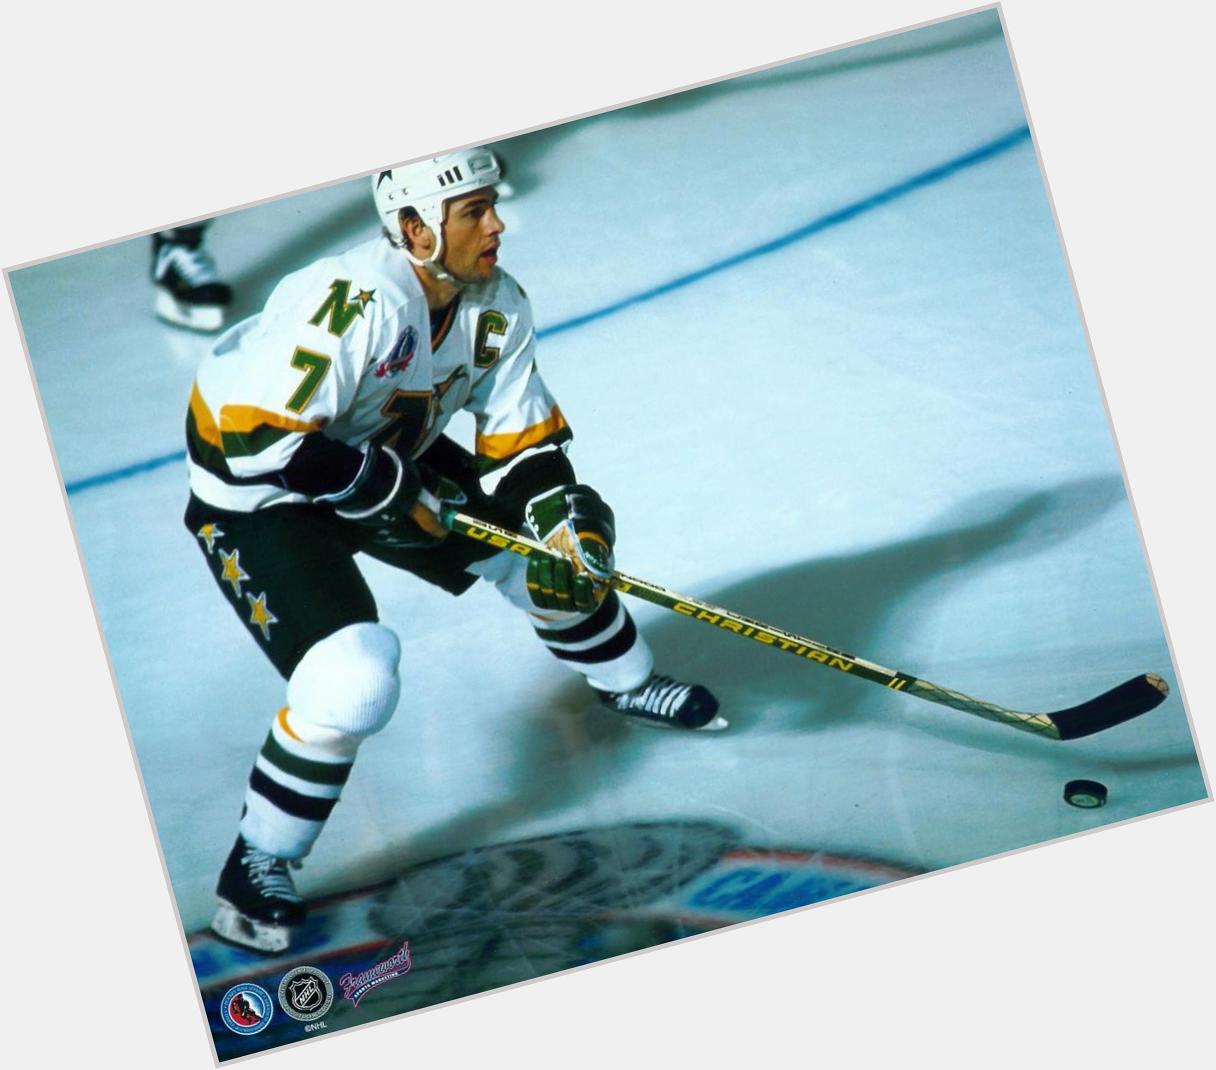 Happy birthday today to former NHL center Neal Broten born in Roseau, MN.  Broten played in the NHL 80-81 thru 96-97 